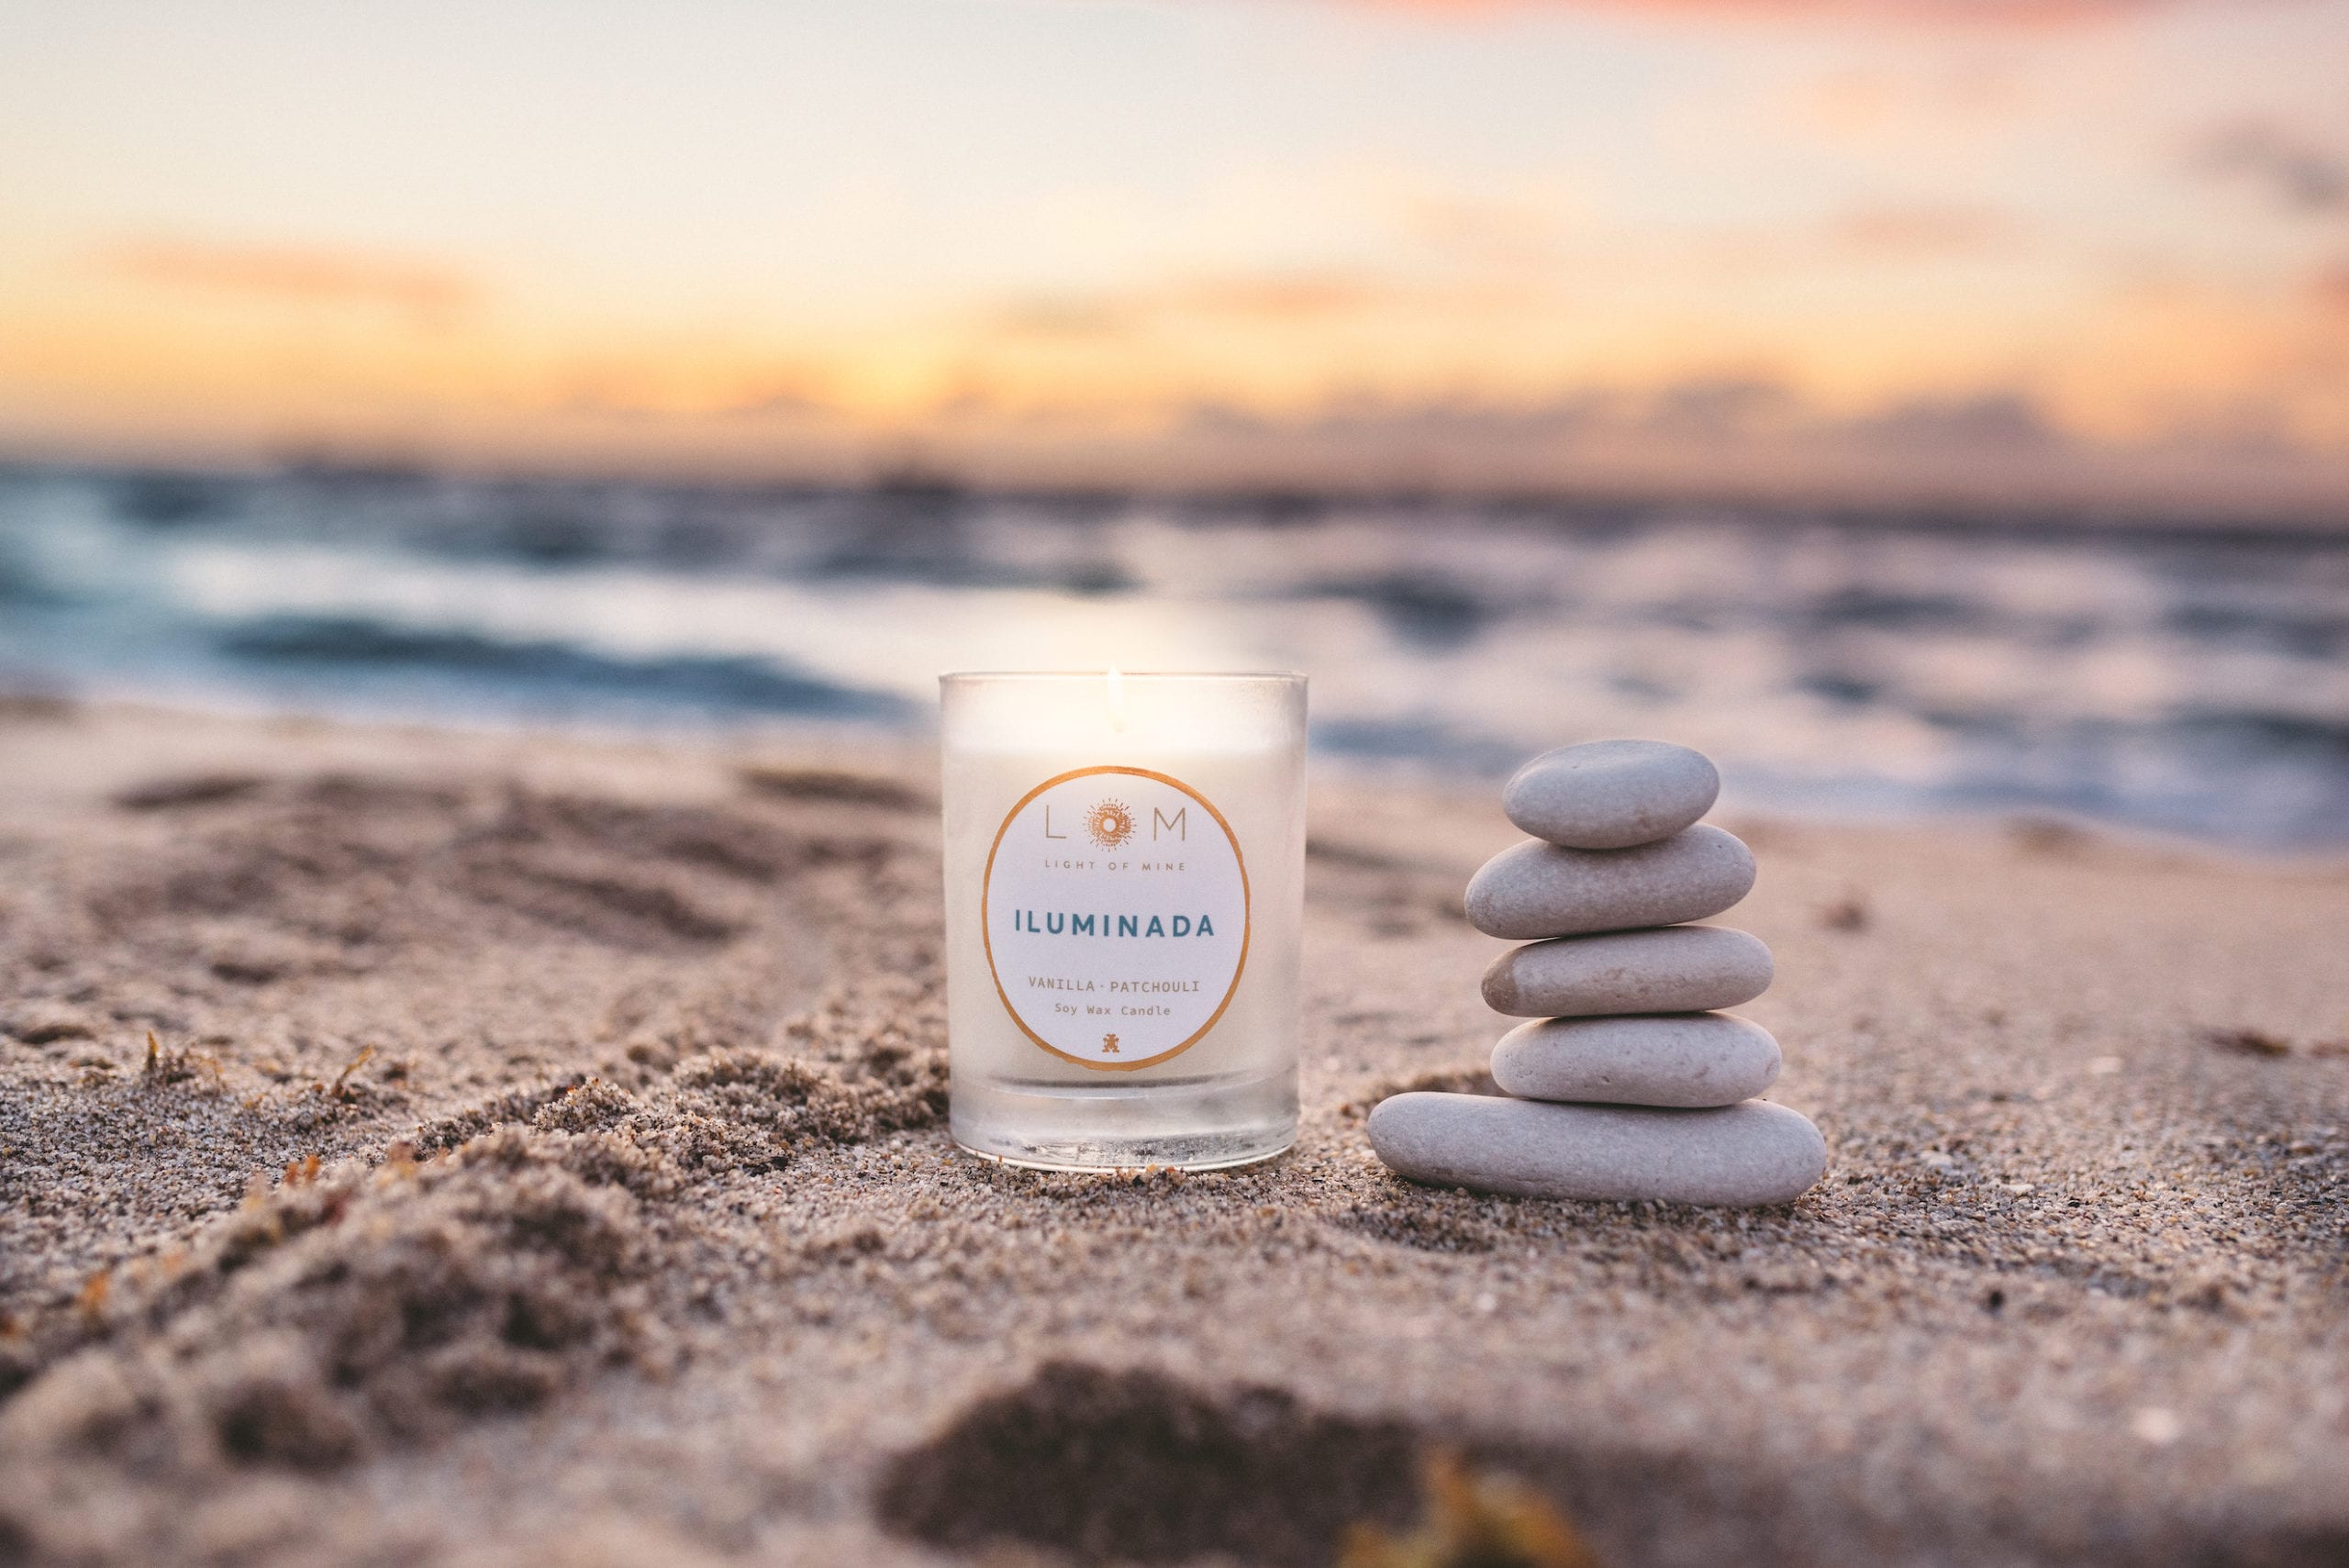 Closeup of Light of Mine soy wax candle on a beach with a stack of stones nearby.